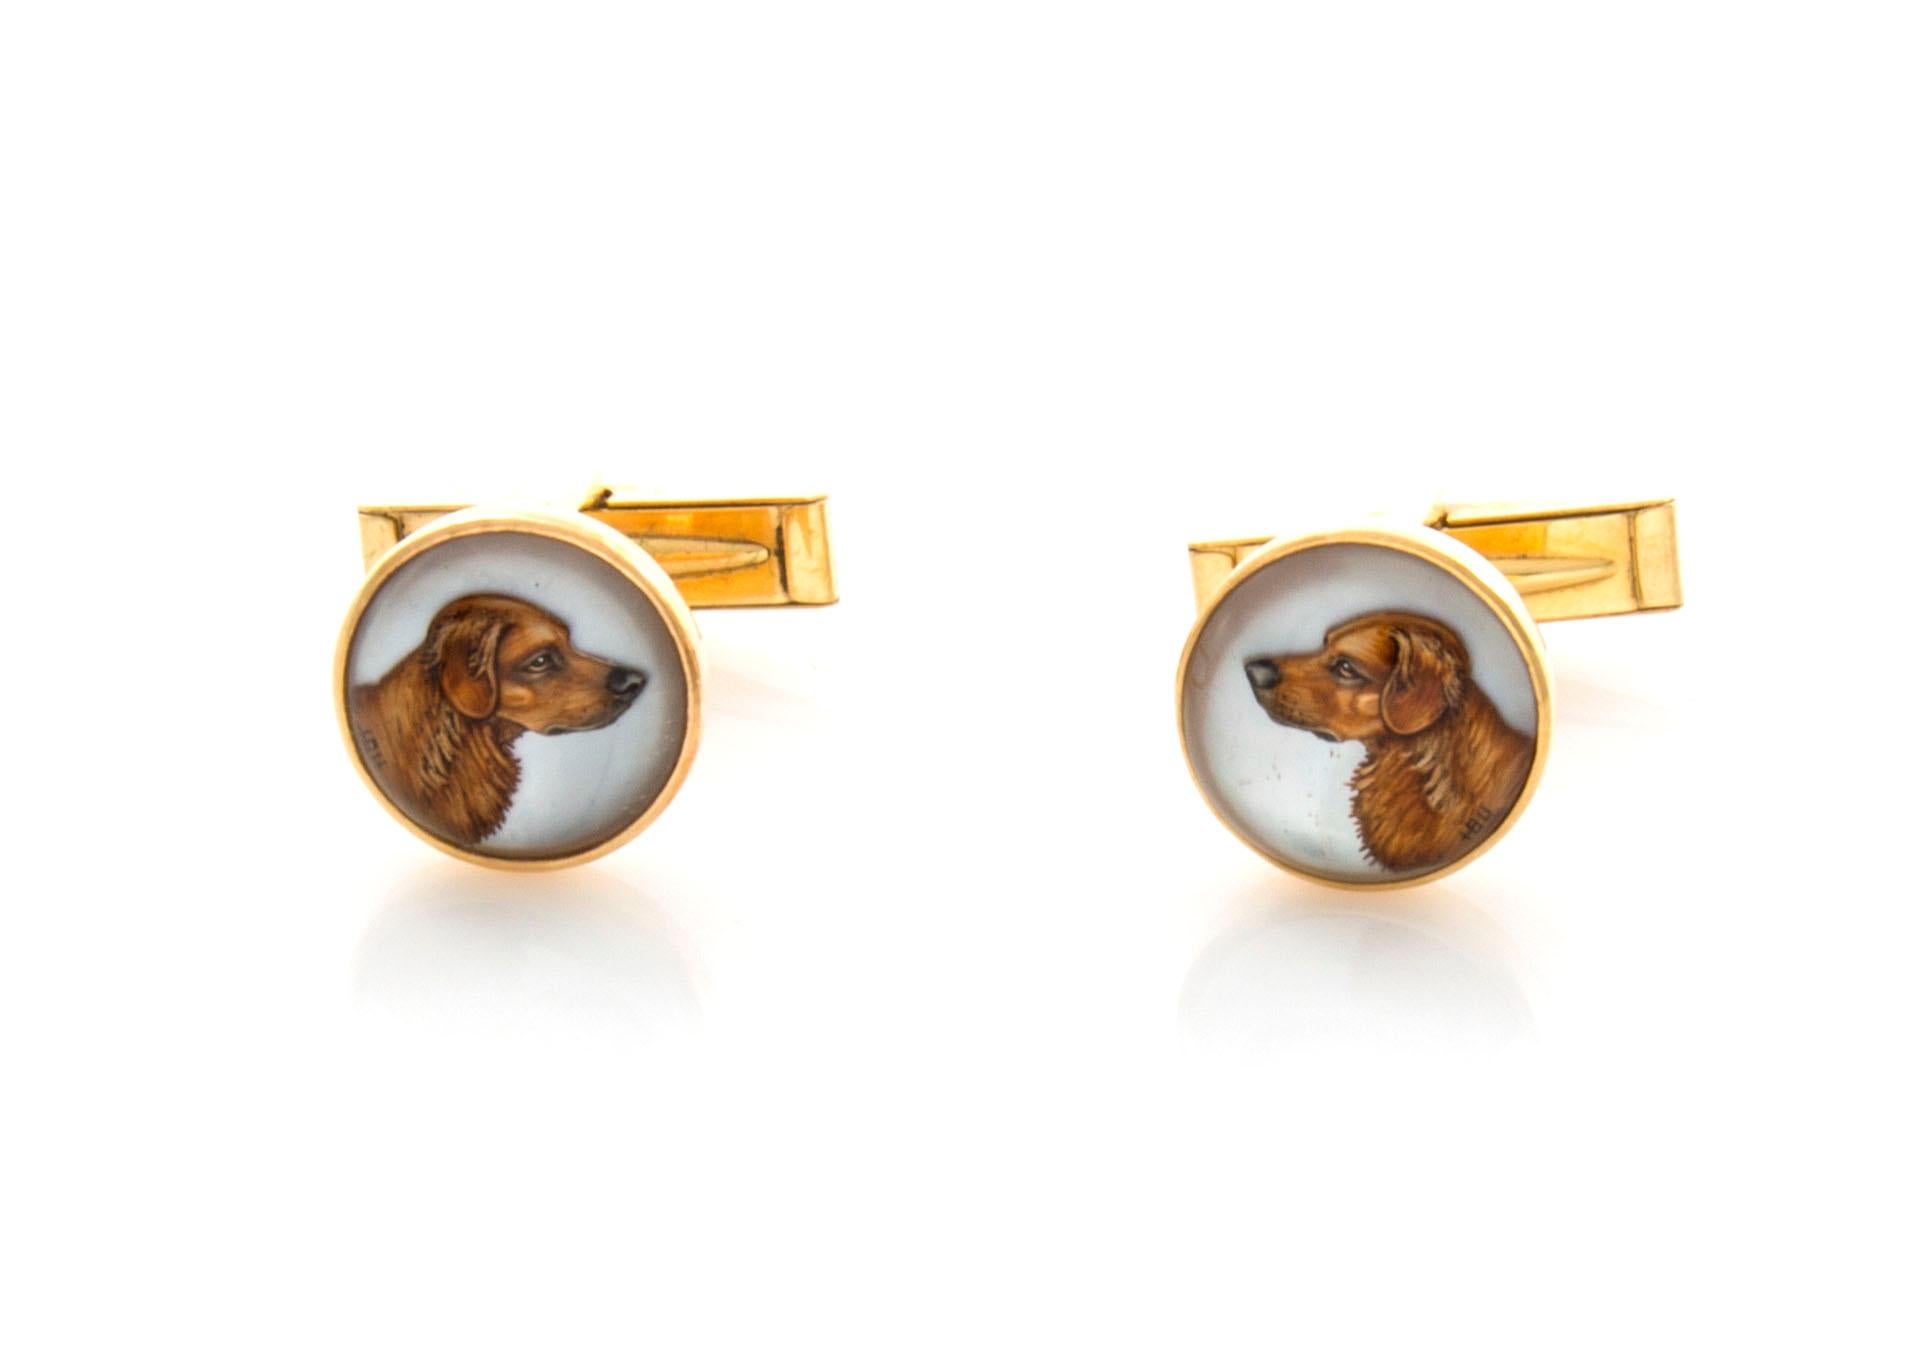 15 mm in diameter, these hunting motif cufflinks with a dog have wonderful detail, multi colors and fine three dimensional painting. Made of 14k gold with whale backs. Artist signed. A reverse crystal intaglio is a rock crystal cabochon with an